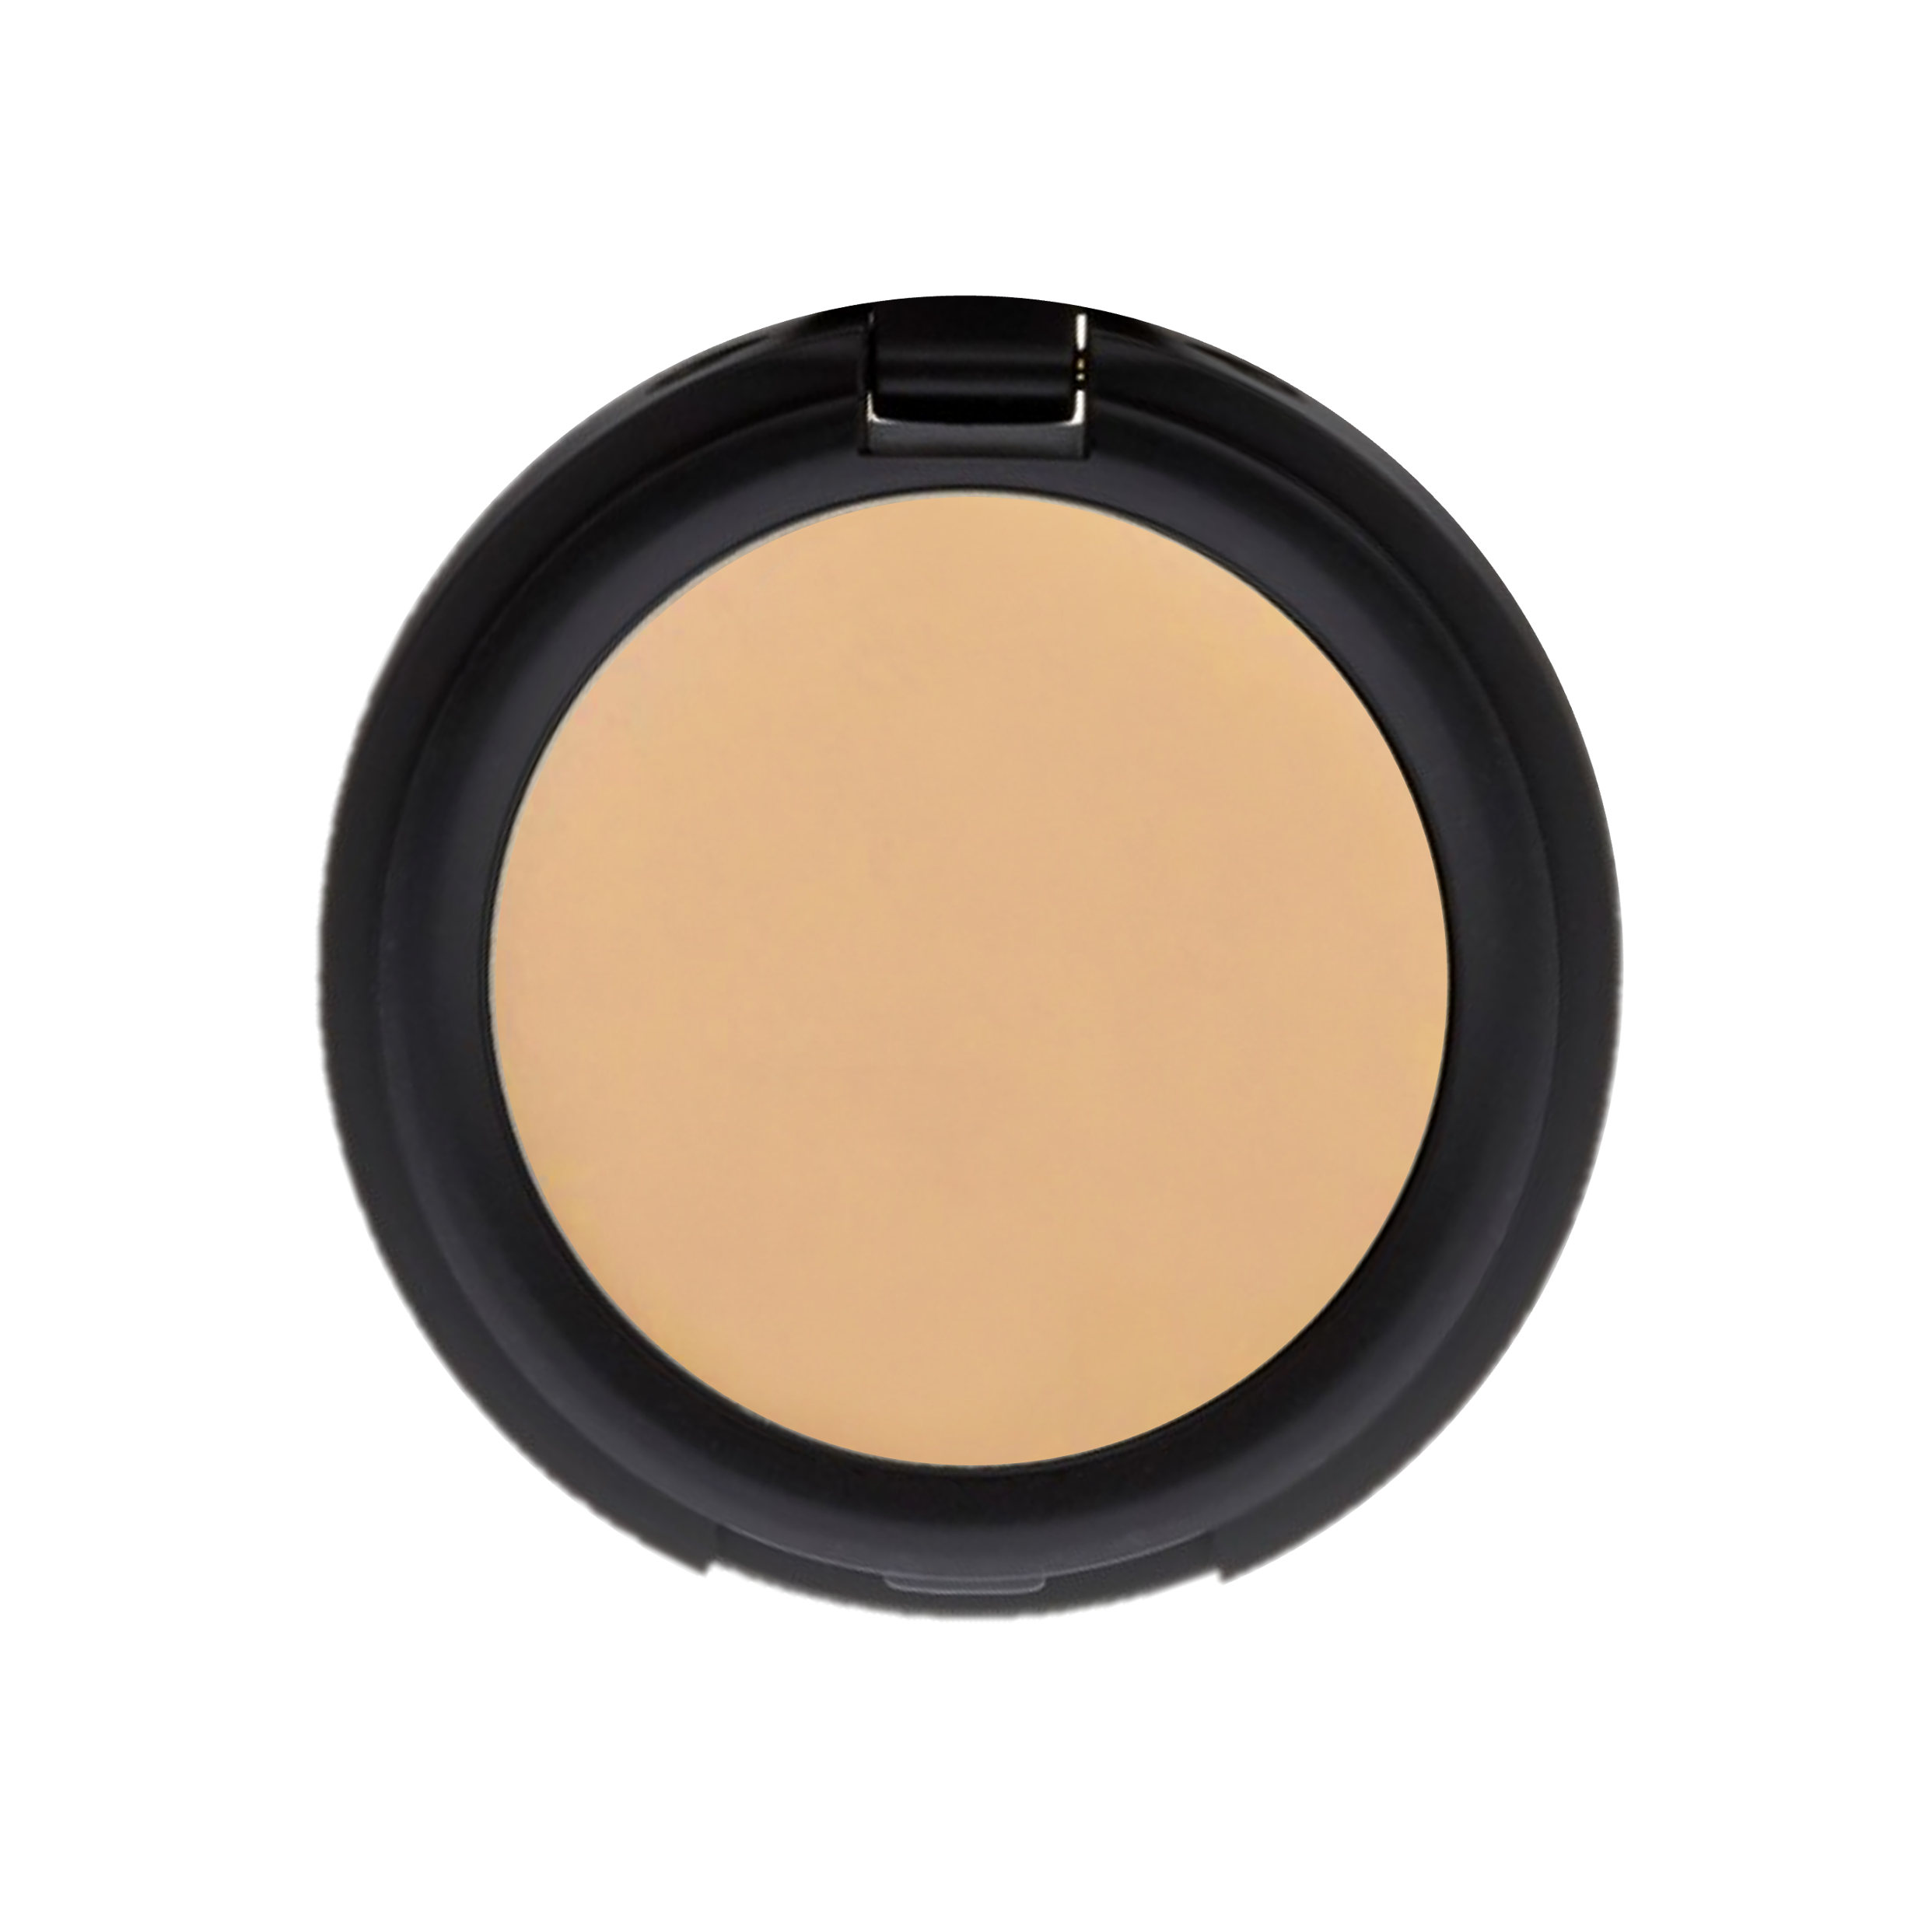 Adaptive Concealing Cream: Dewy, Medium to Full Coverage - Without Mica, & More by Omiana